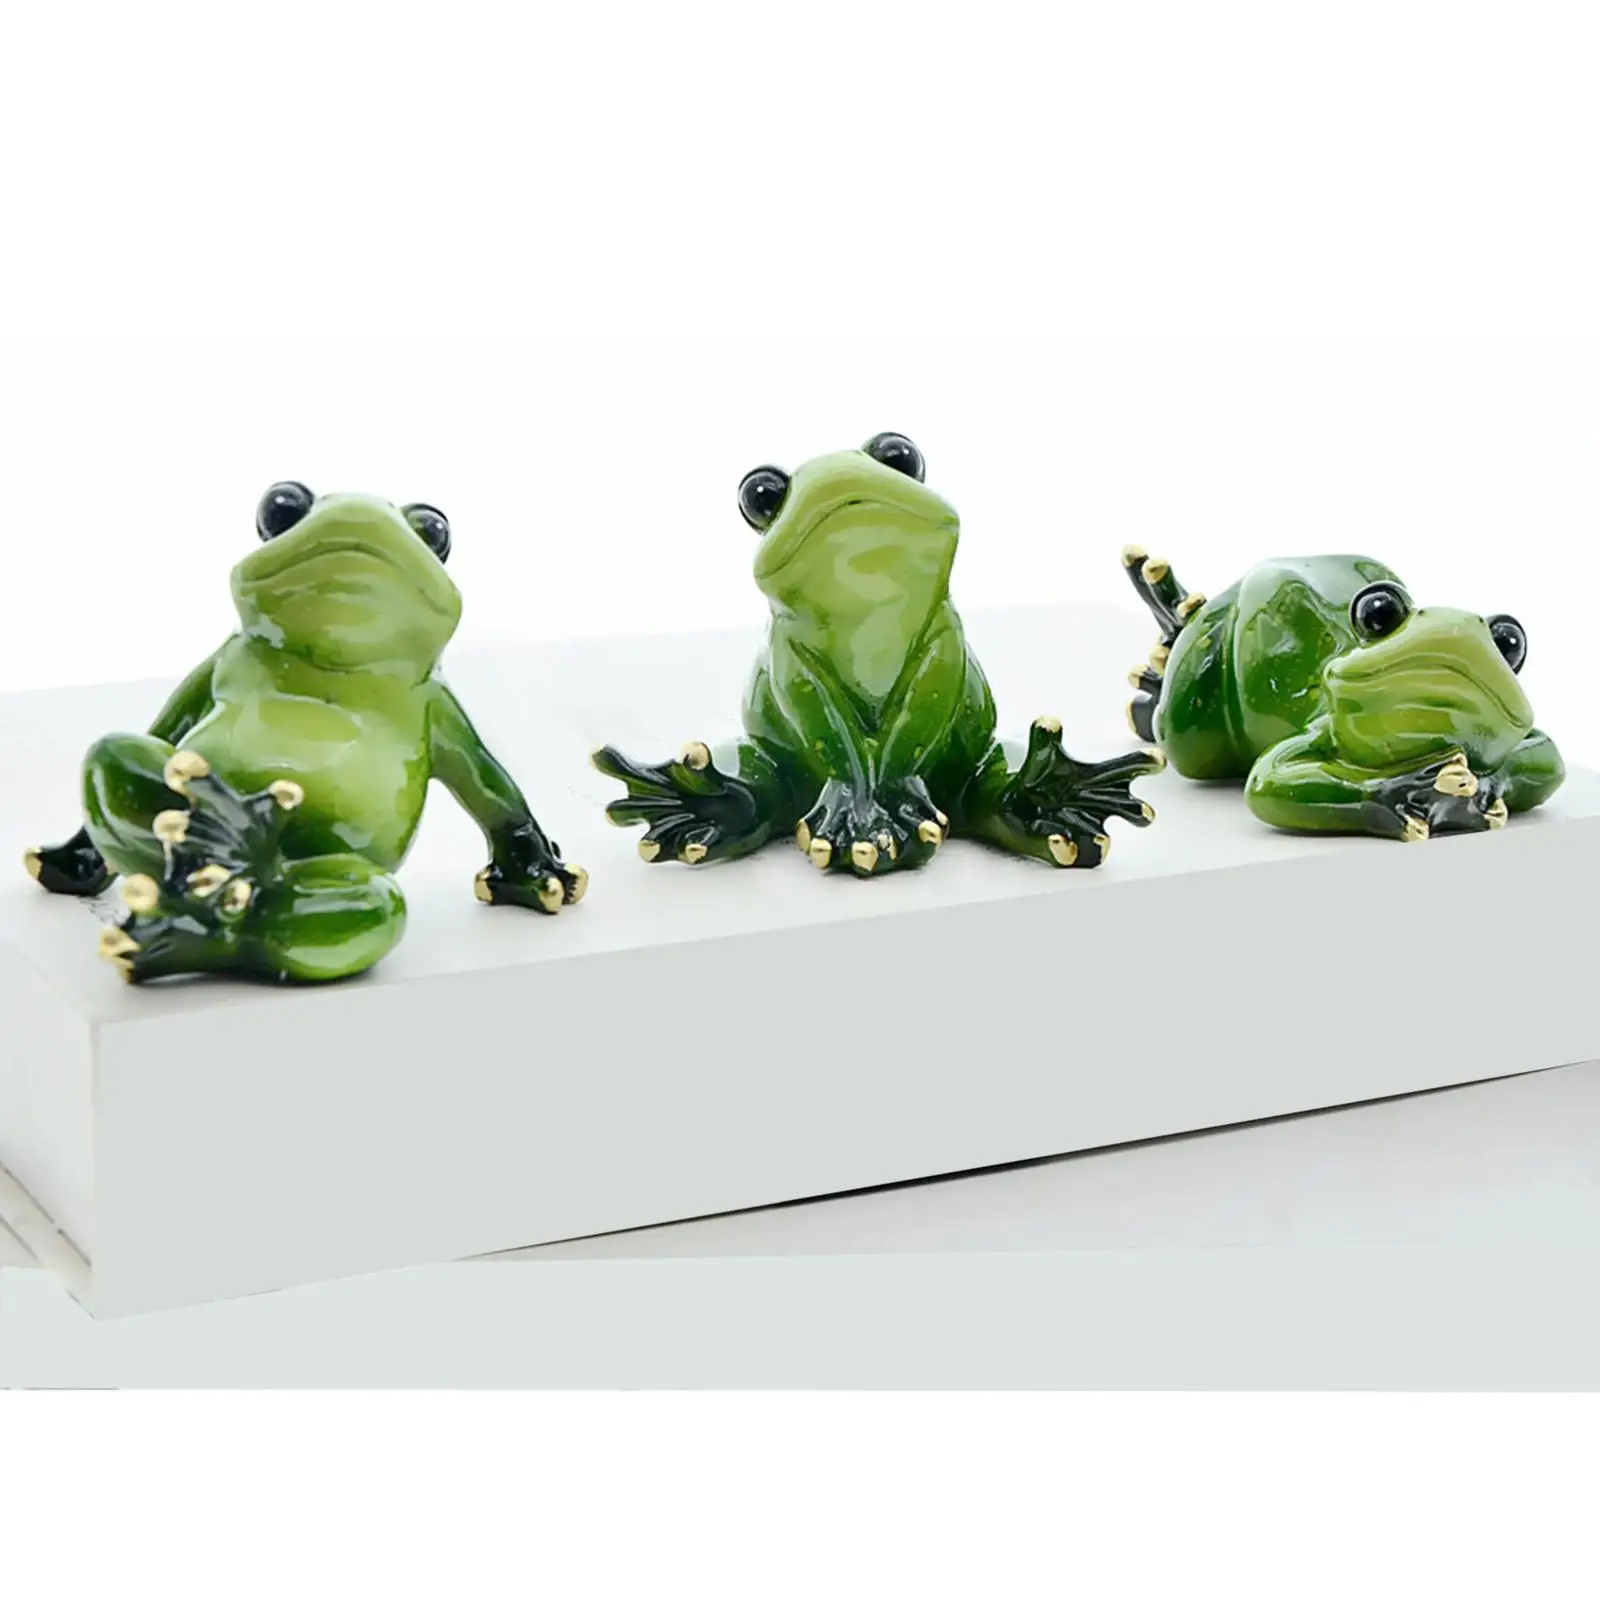 3x Frog Figurines Animal Sculpture Ornament for Office Table Patio Restaurant Decoration